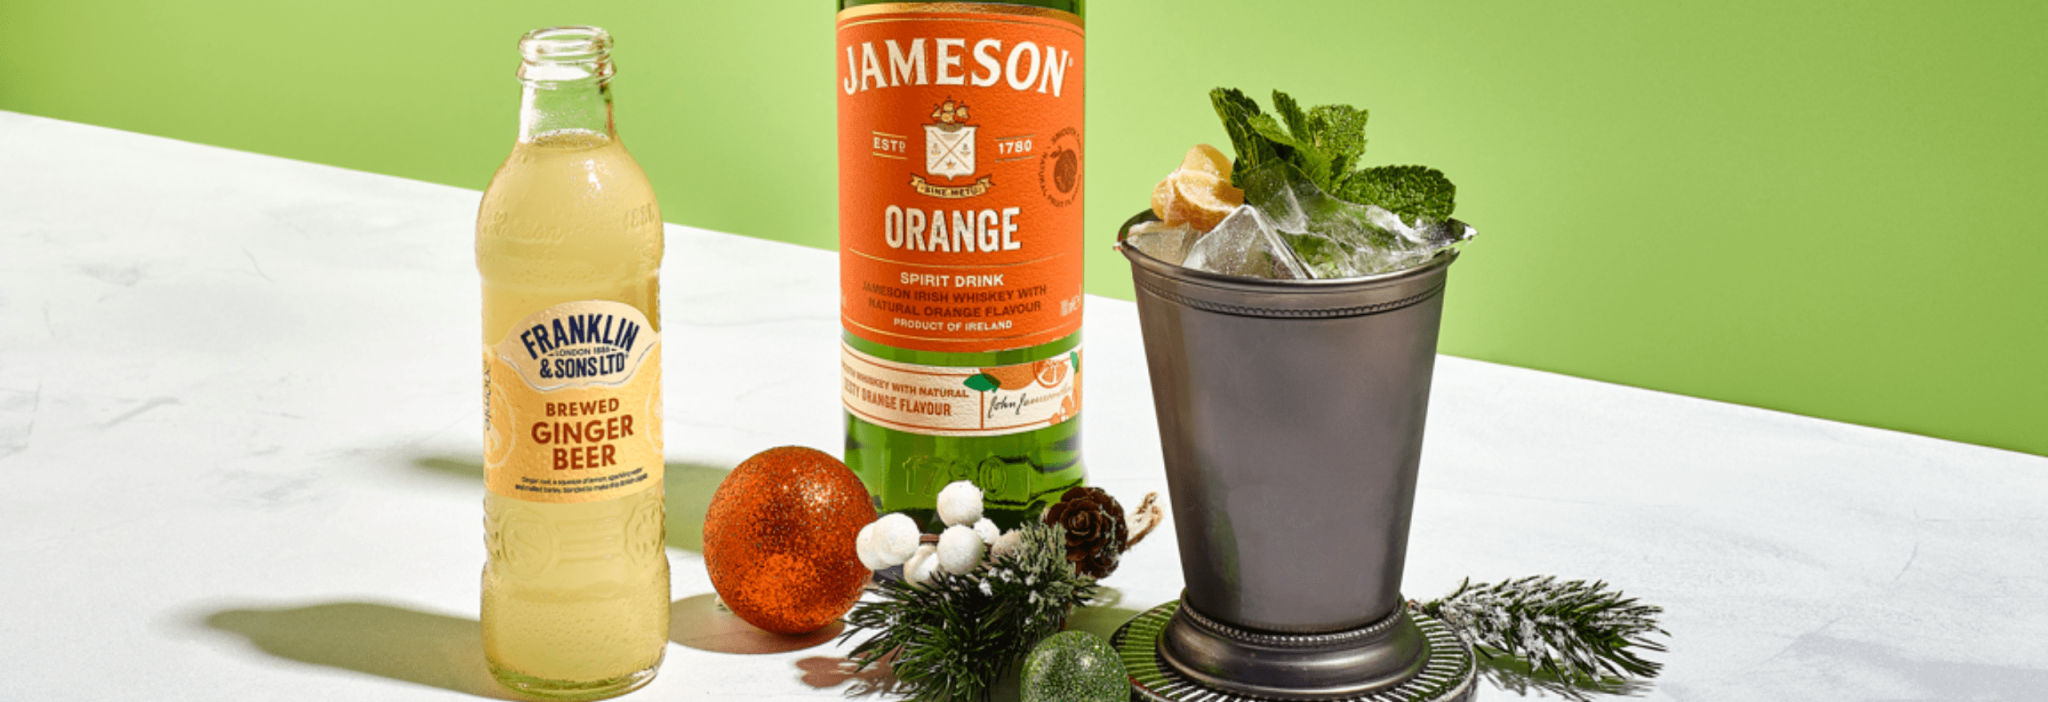 Franklin & Sons | Spiced Mule Christmas cocktail